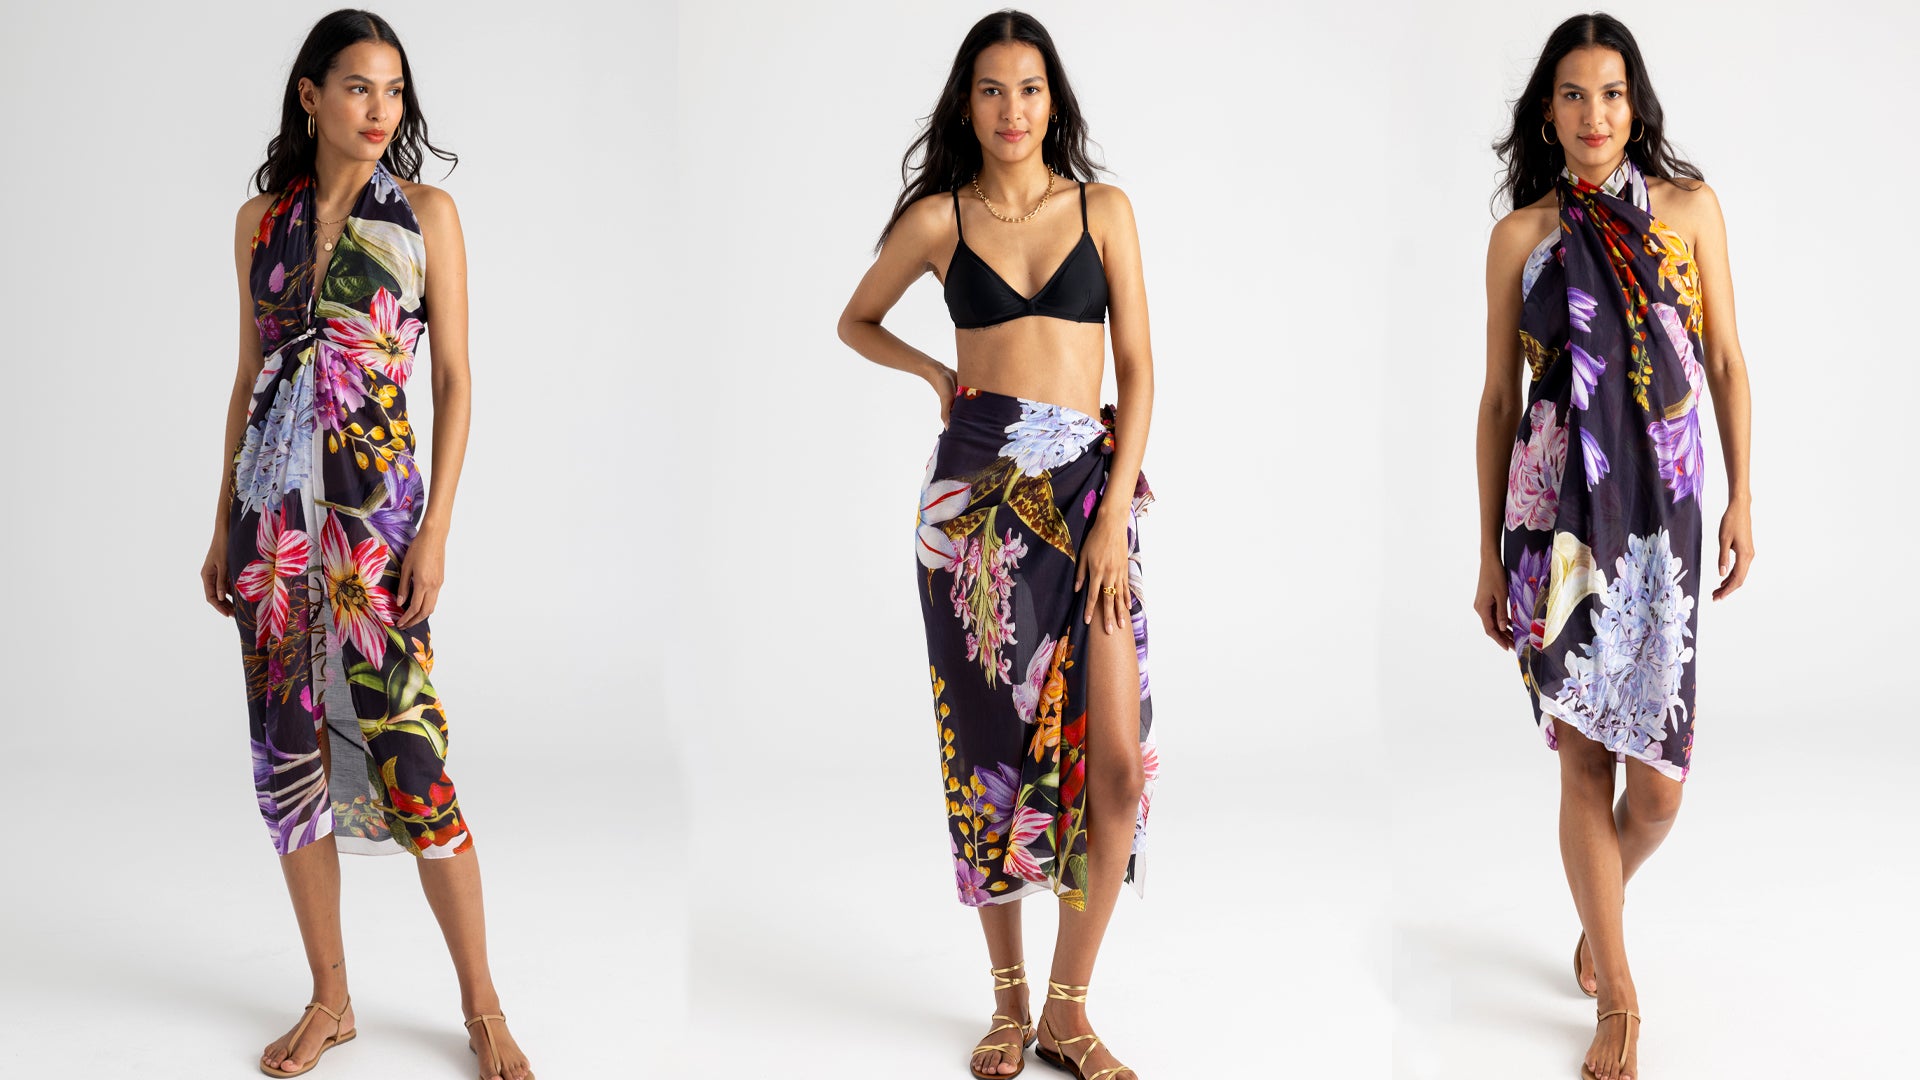 model wearing the Botanica Sarong Scarf in black 3 different ways - as a dress, as a skirt, and as a halter dress.